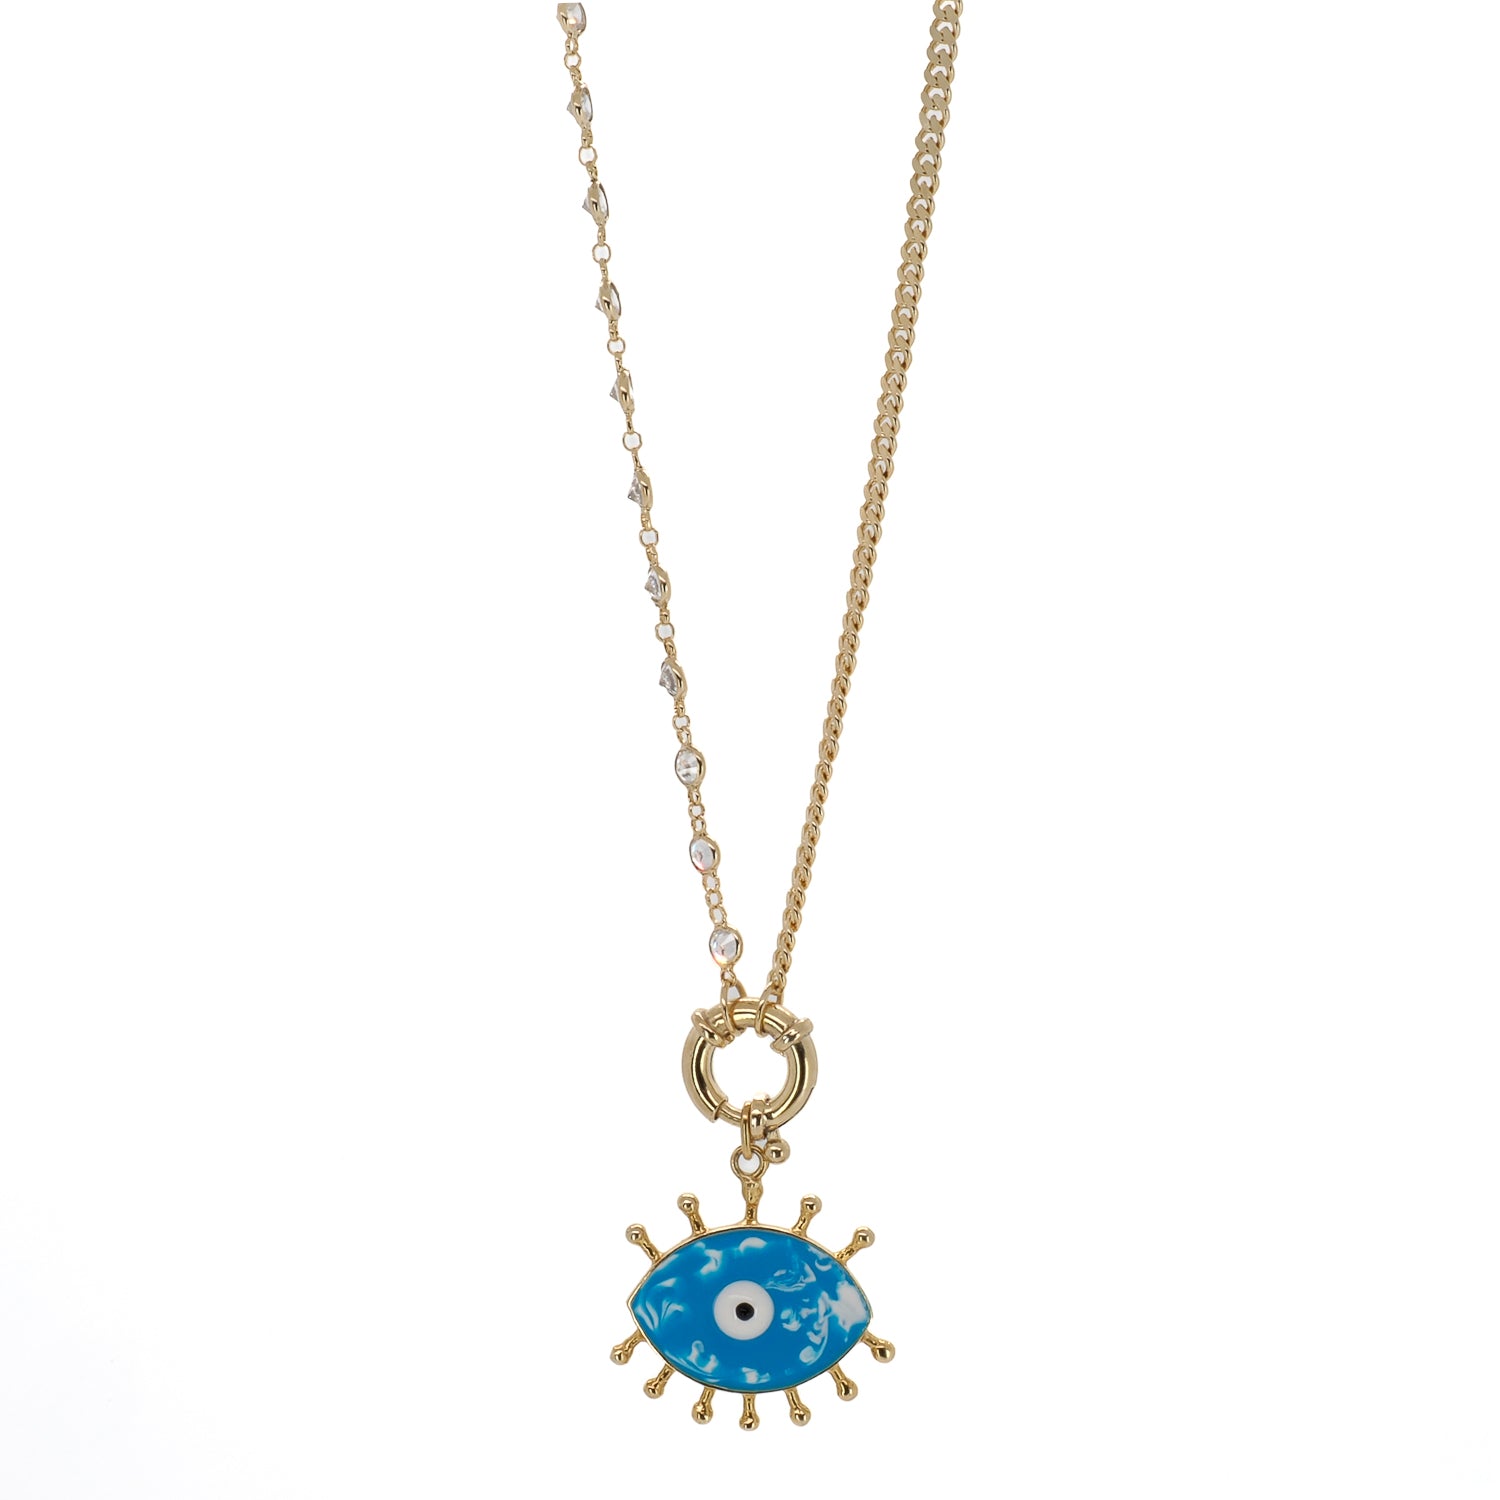 The Turquoise Evil Eye Chain Necklace, a symbol of luck and protection, crafted with high-quality materials and attention to detail.